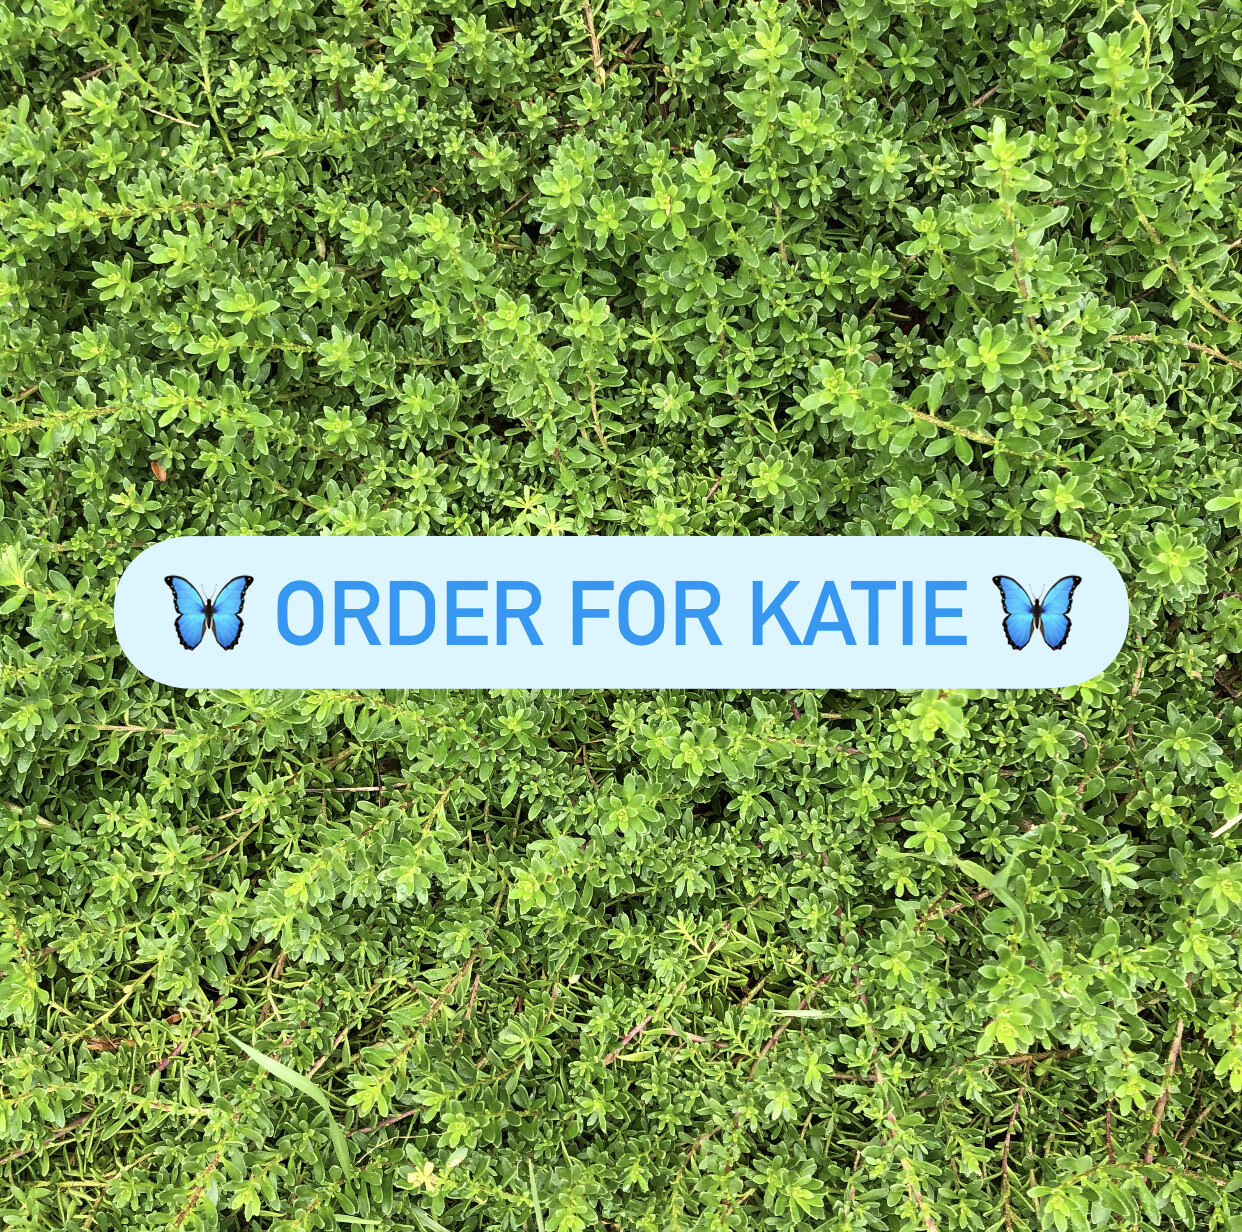 Z. Order for Katie